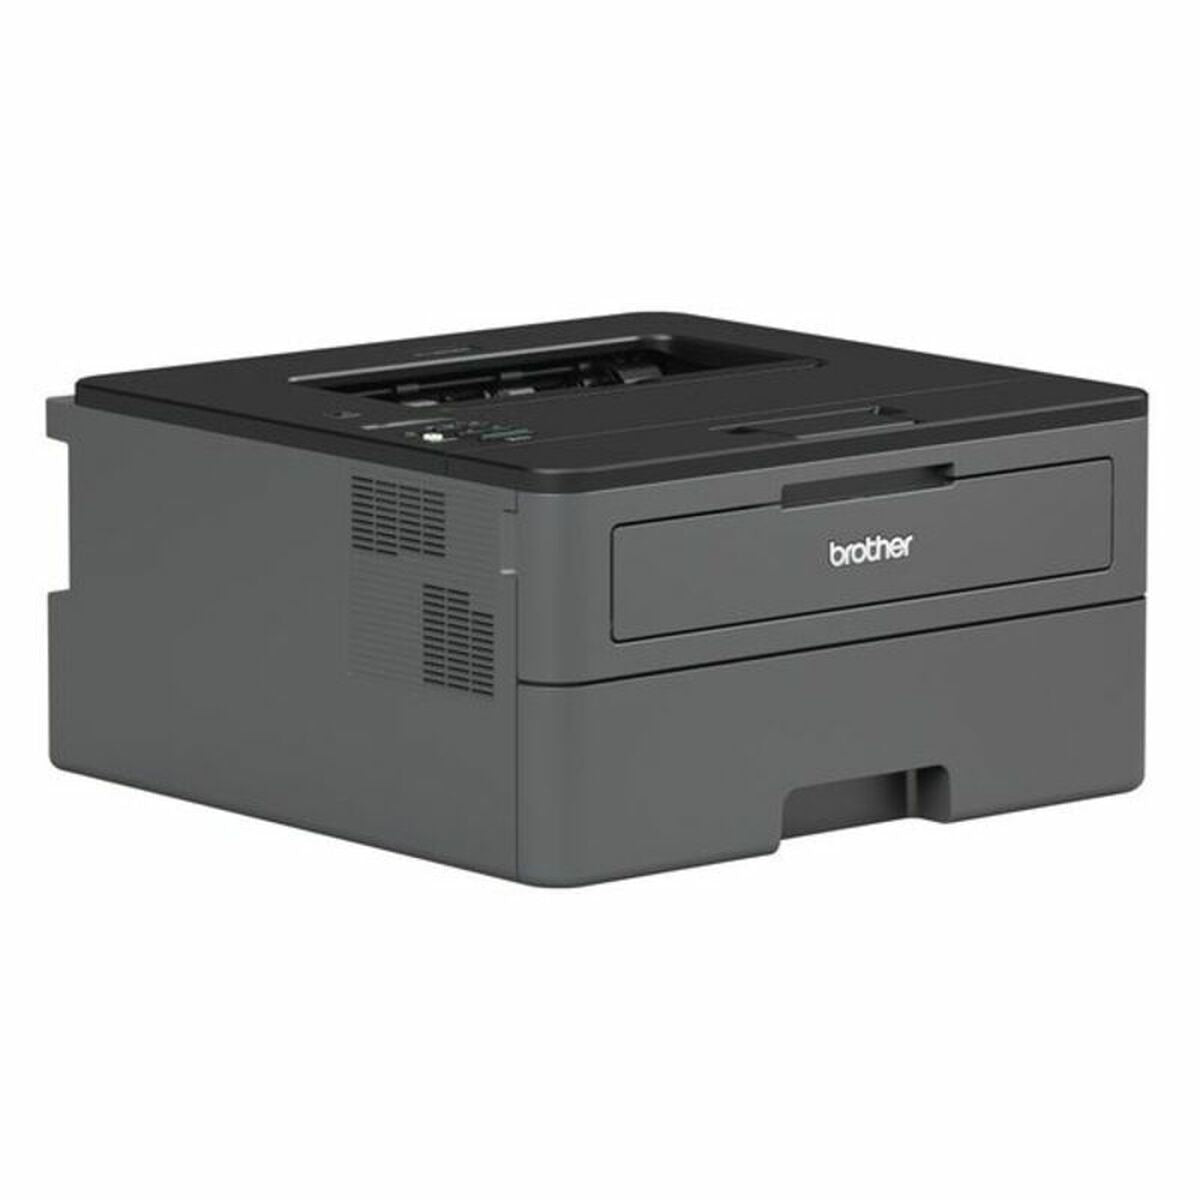 Monochrome Laser Printer Brother HLL2370DNG1